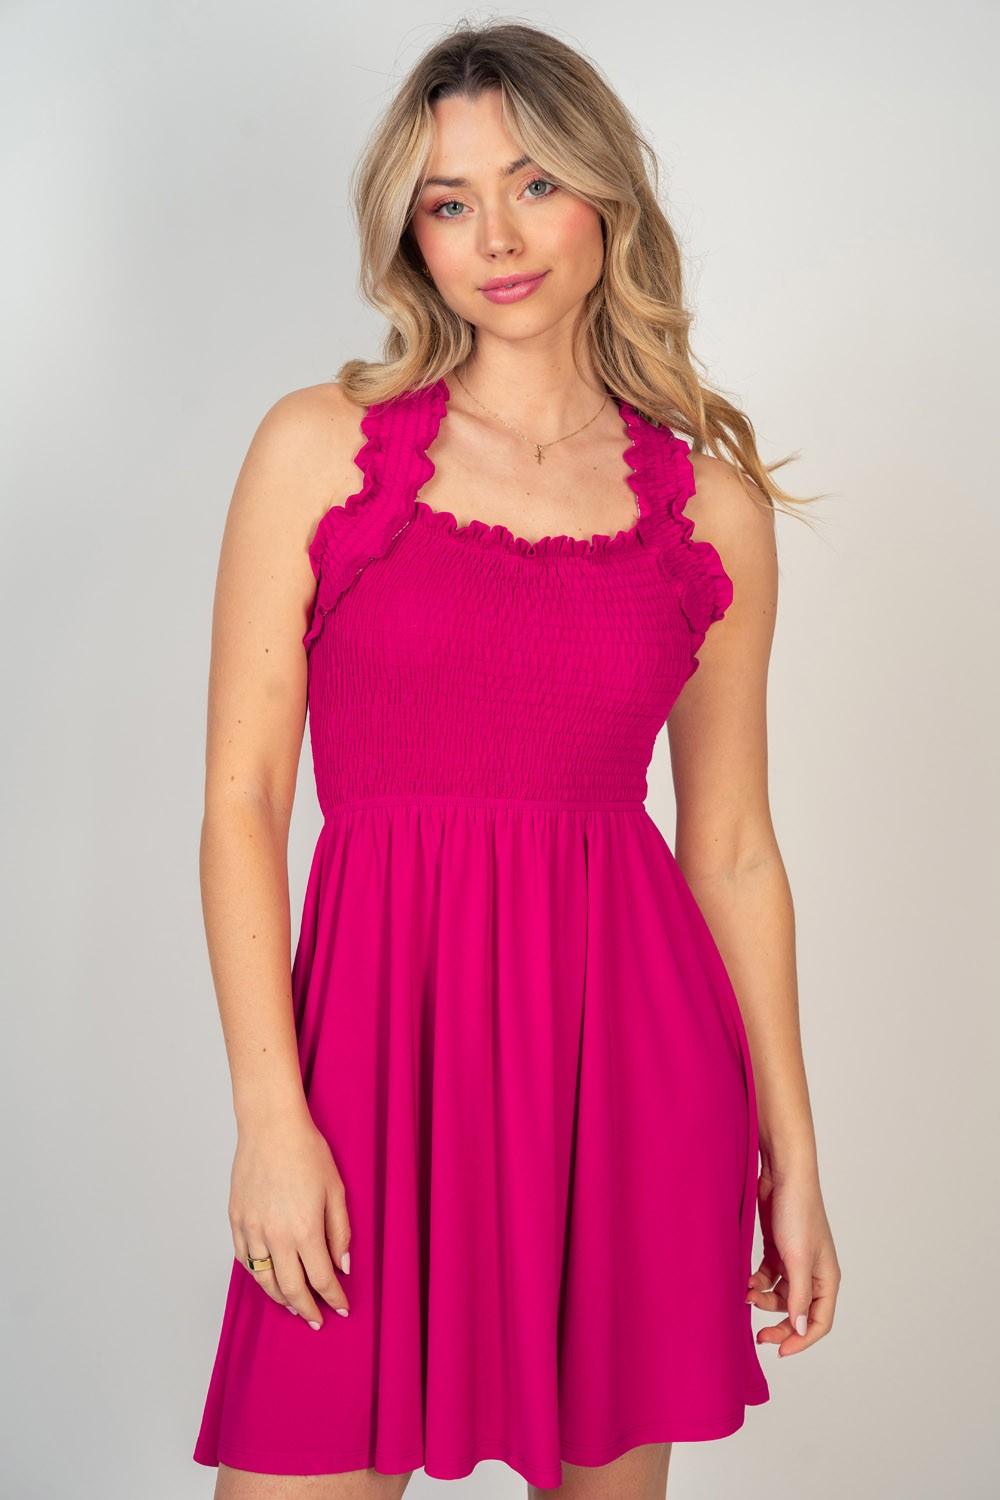 Smocked In Magenta Dress - Lady Dorothy Boutique